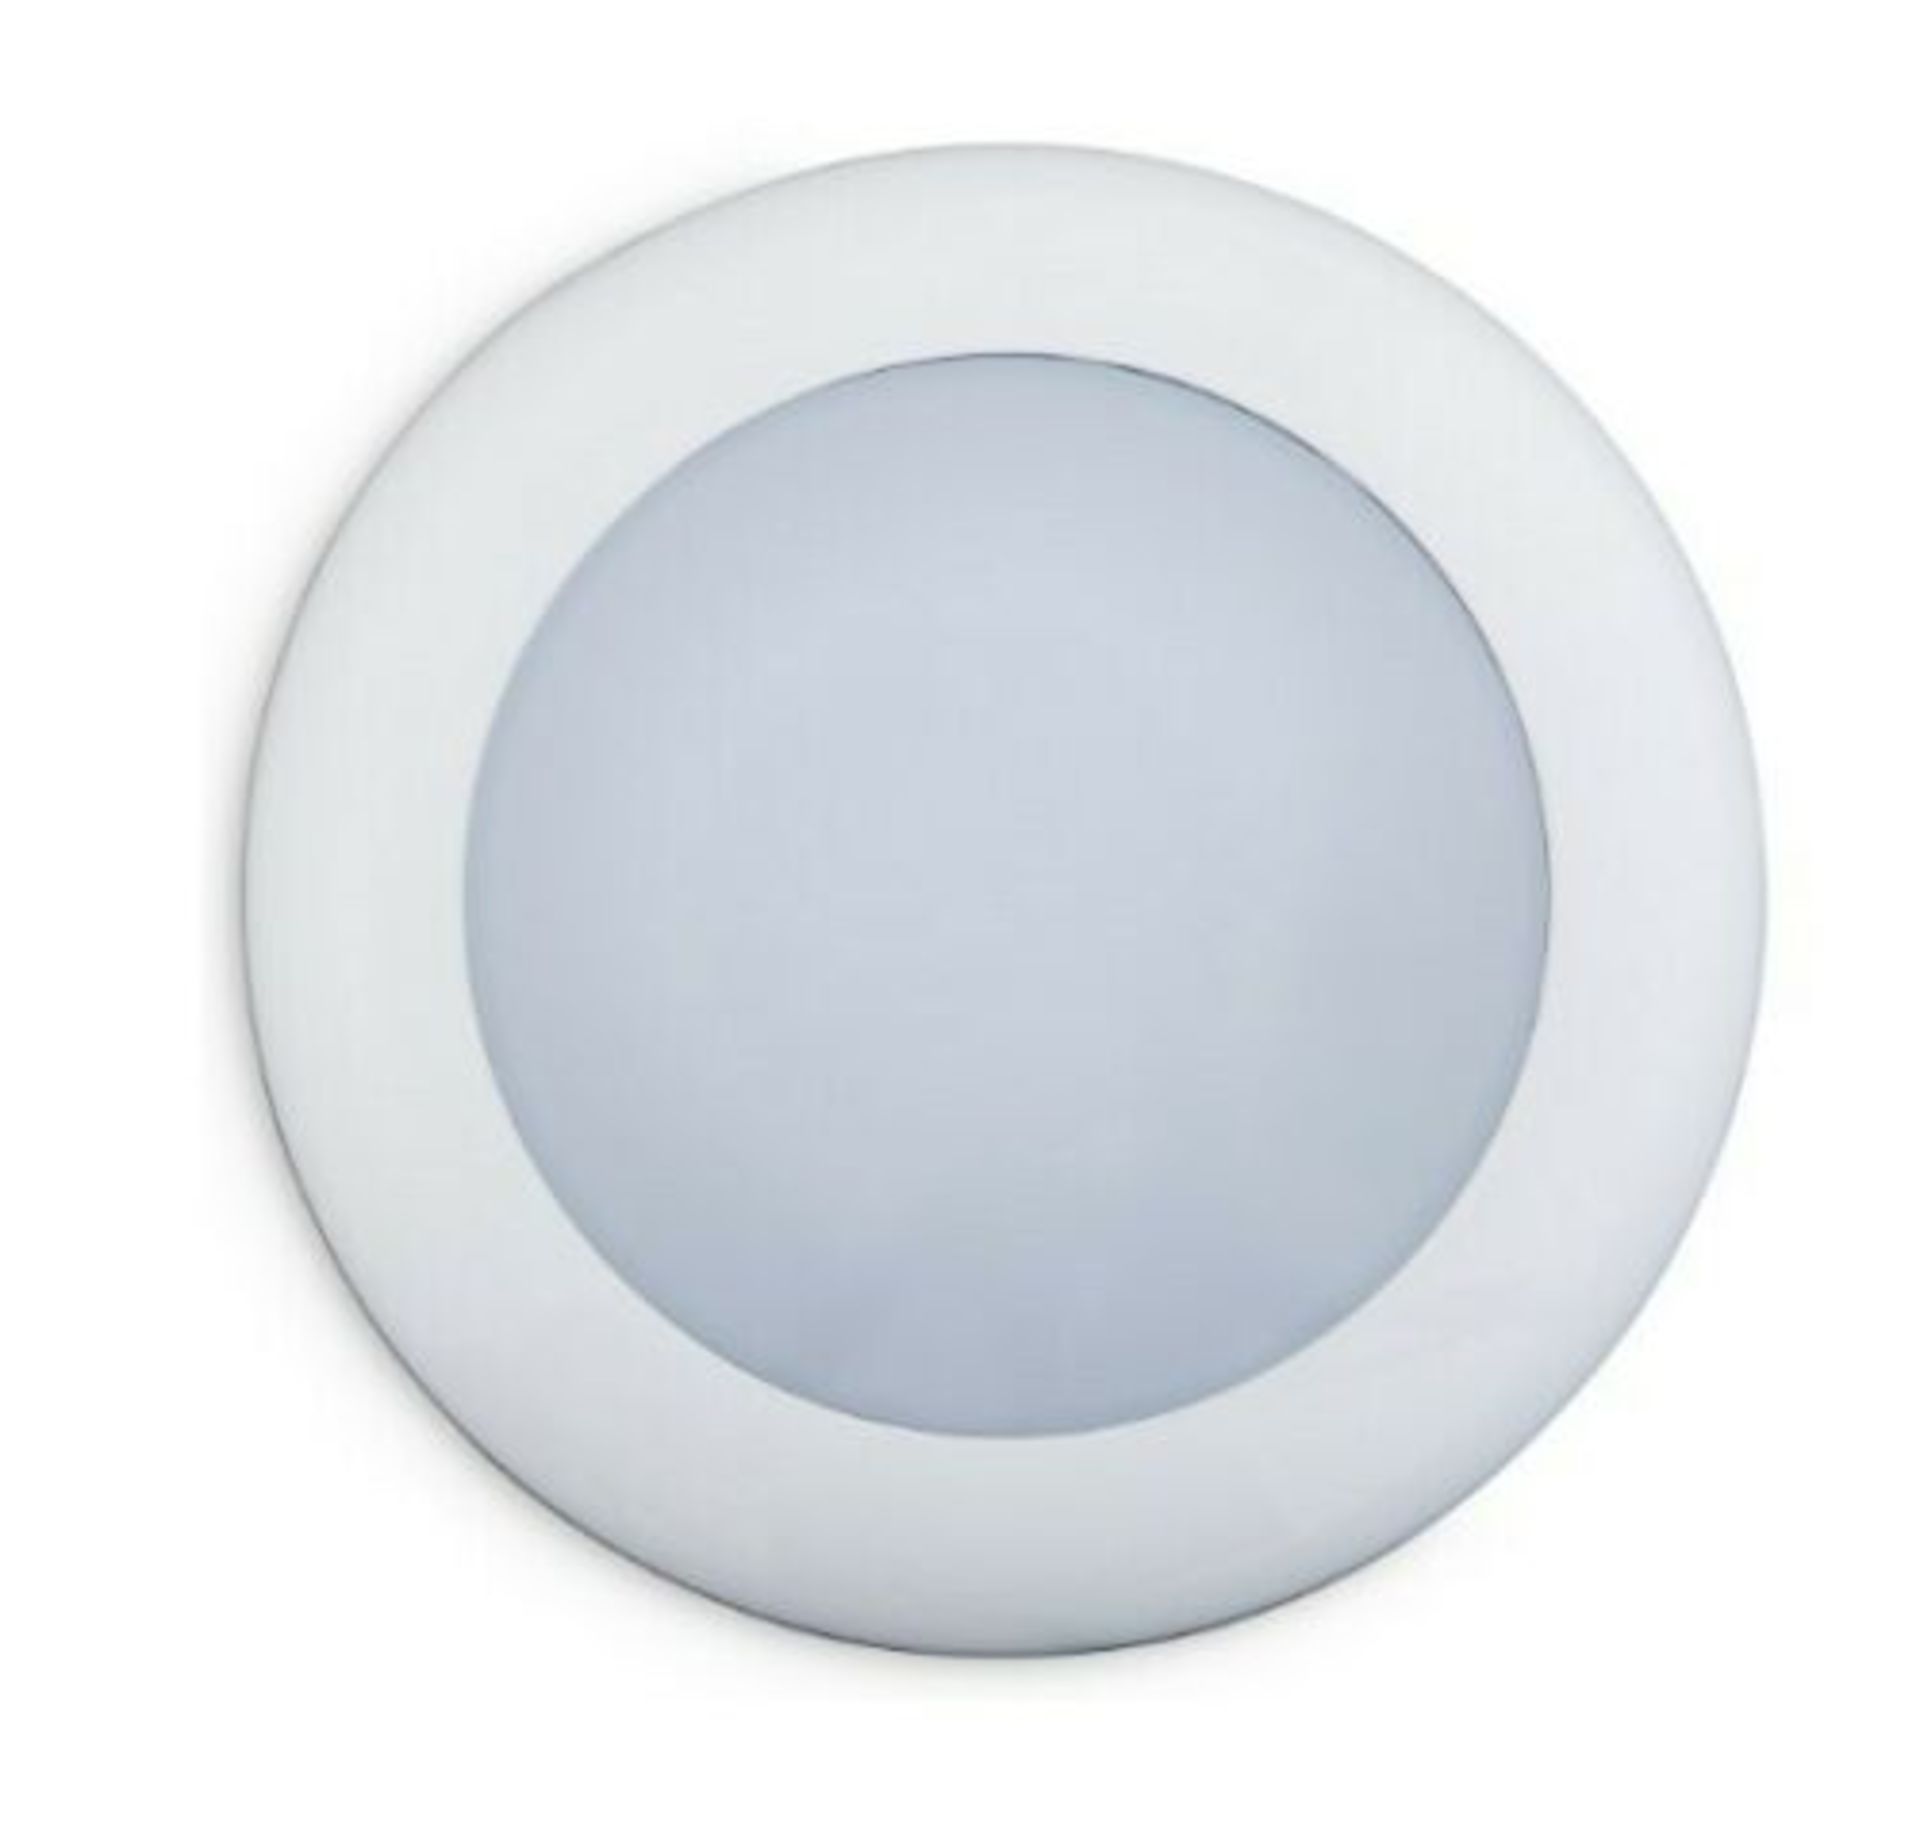 Outdoor Waterproof LED Spotlight - Suitable for Showers, Wet Rooms, Pools